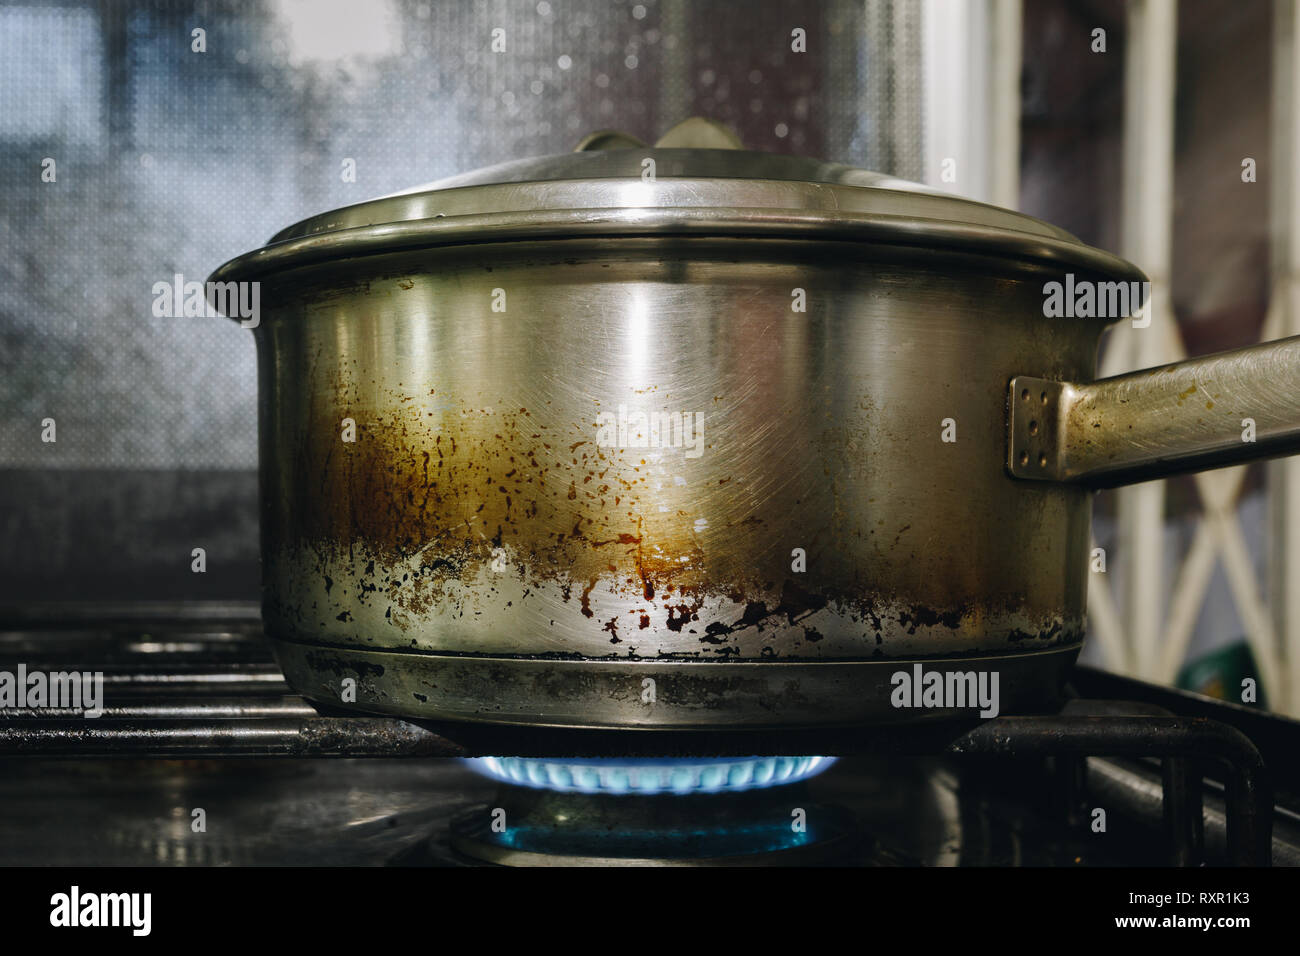 Old stainless steel handy pot on stove. Gas hob cooker flame alight, close-up Stock Photo